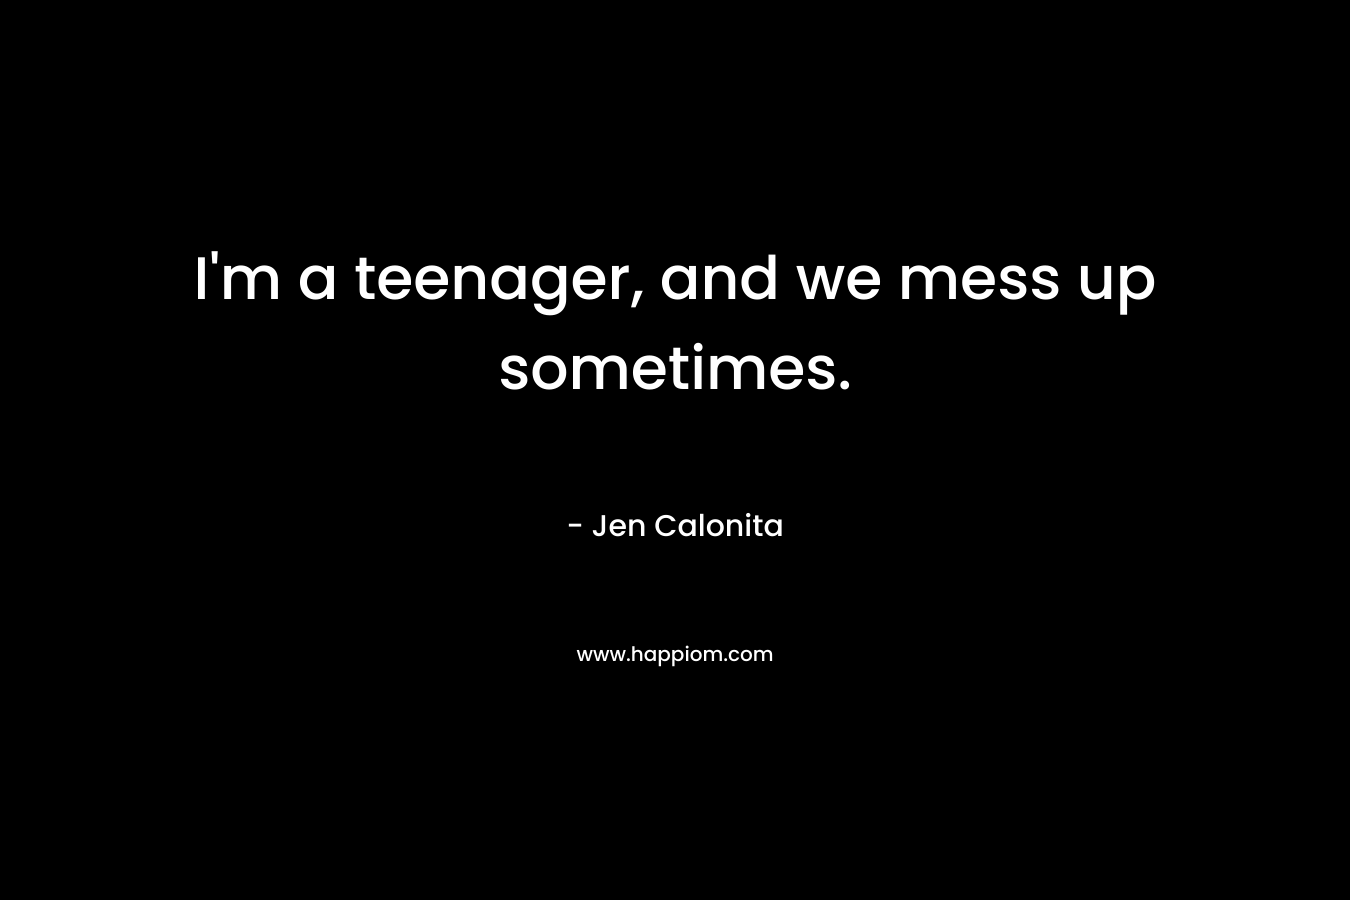 I'm a teenager, and we mess up sometimes.